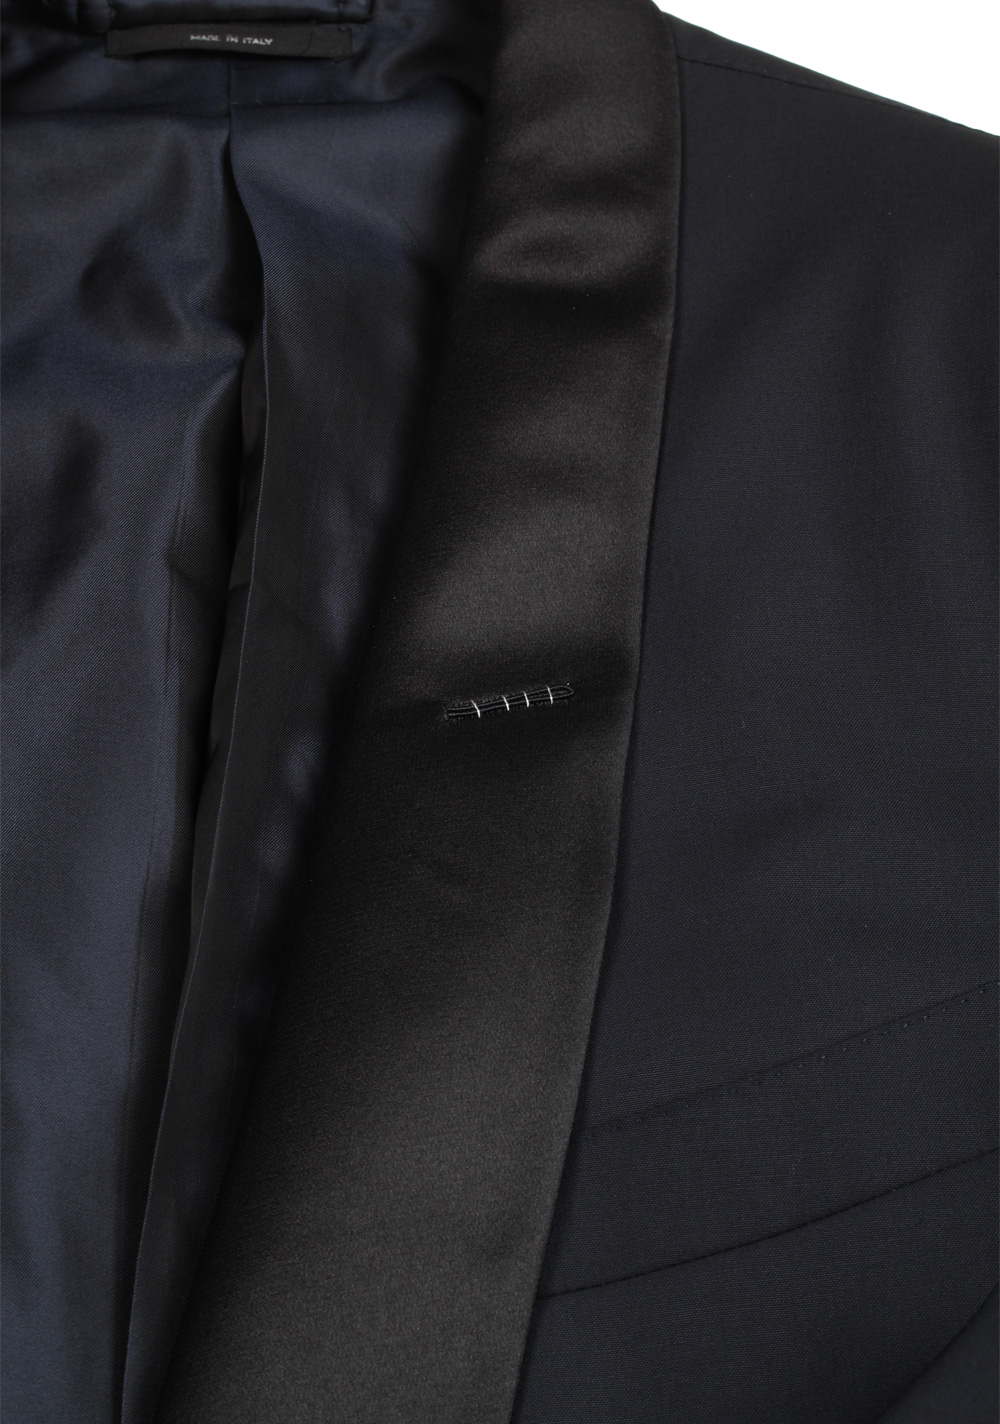 TOM FORD O’Connor Shawl Collar Midnight Blue Sport Coat Tuxedo Dinner Jacket Size 54 / 44R U.S. Fit Y | Costume Limité